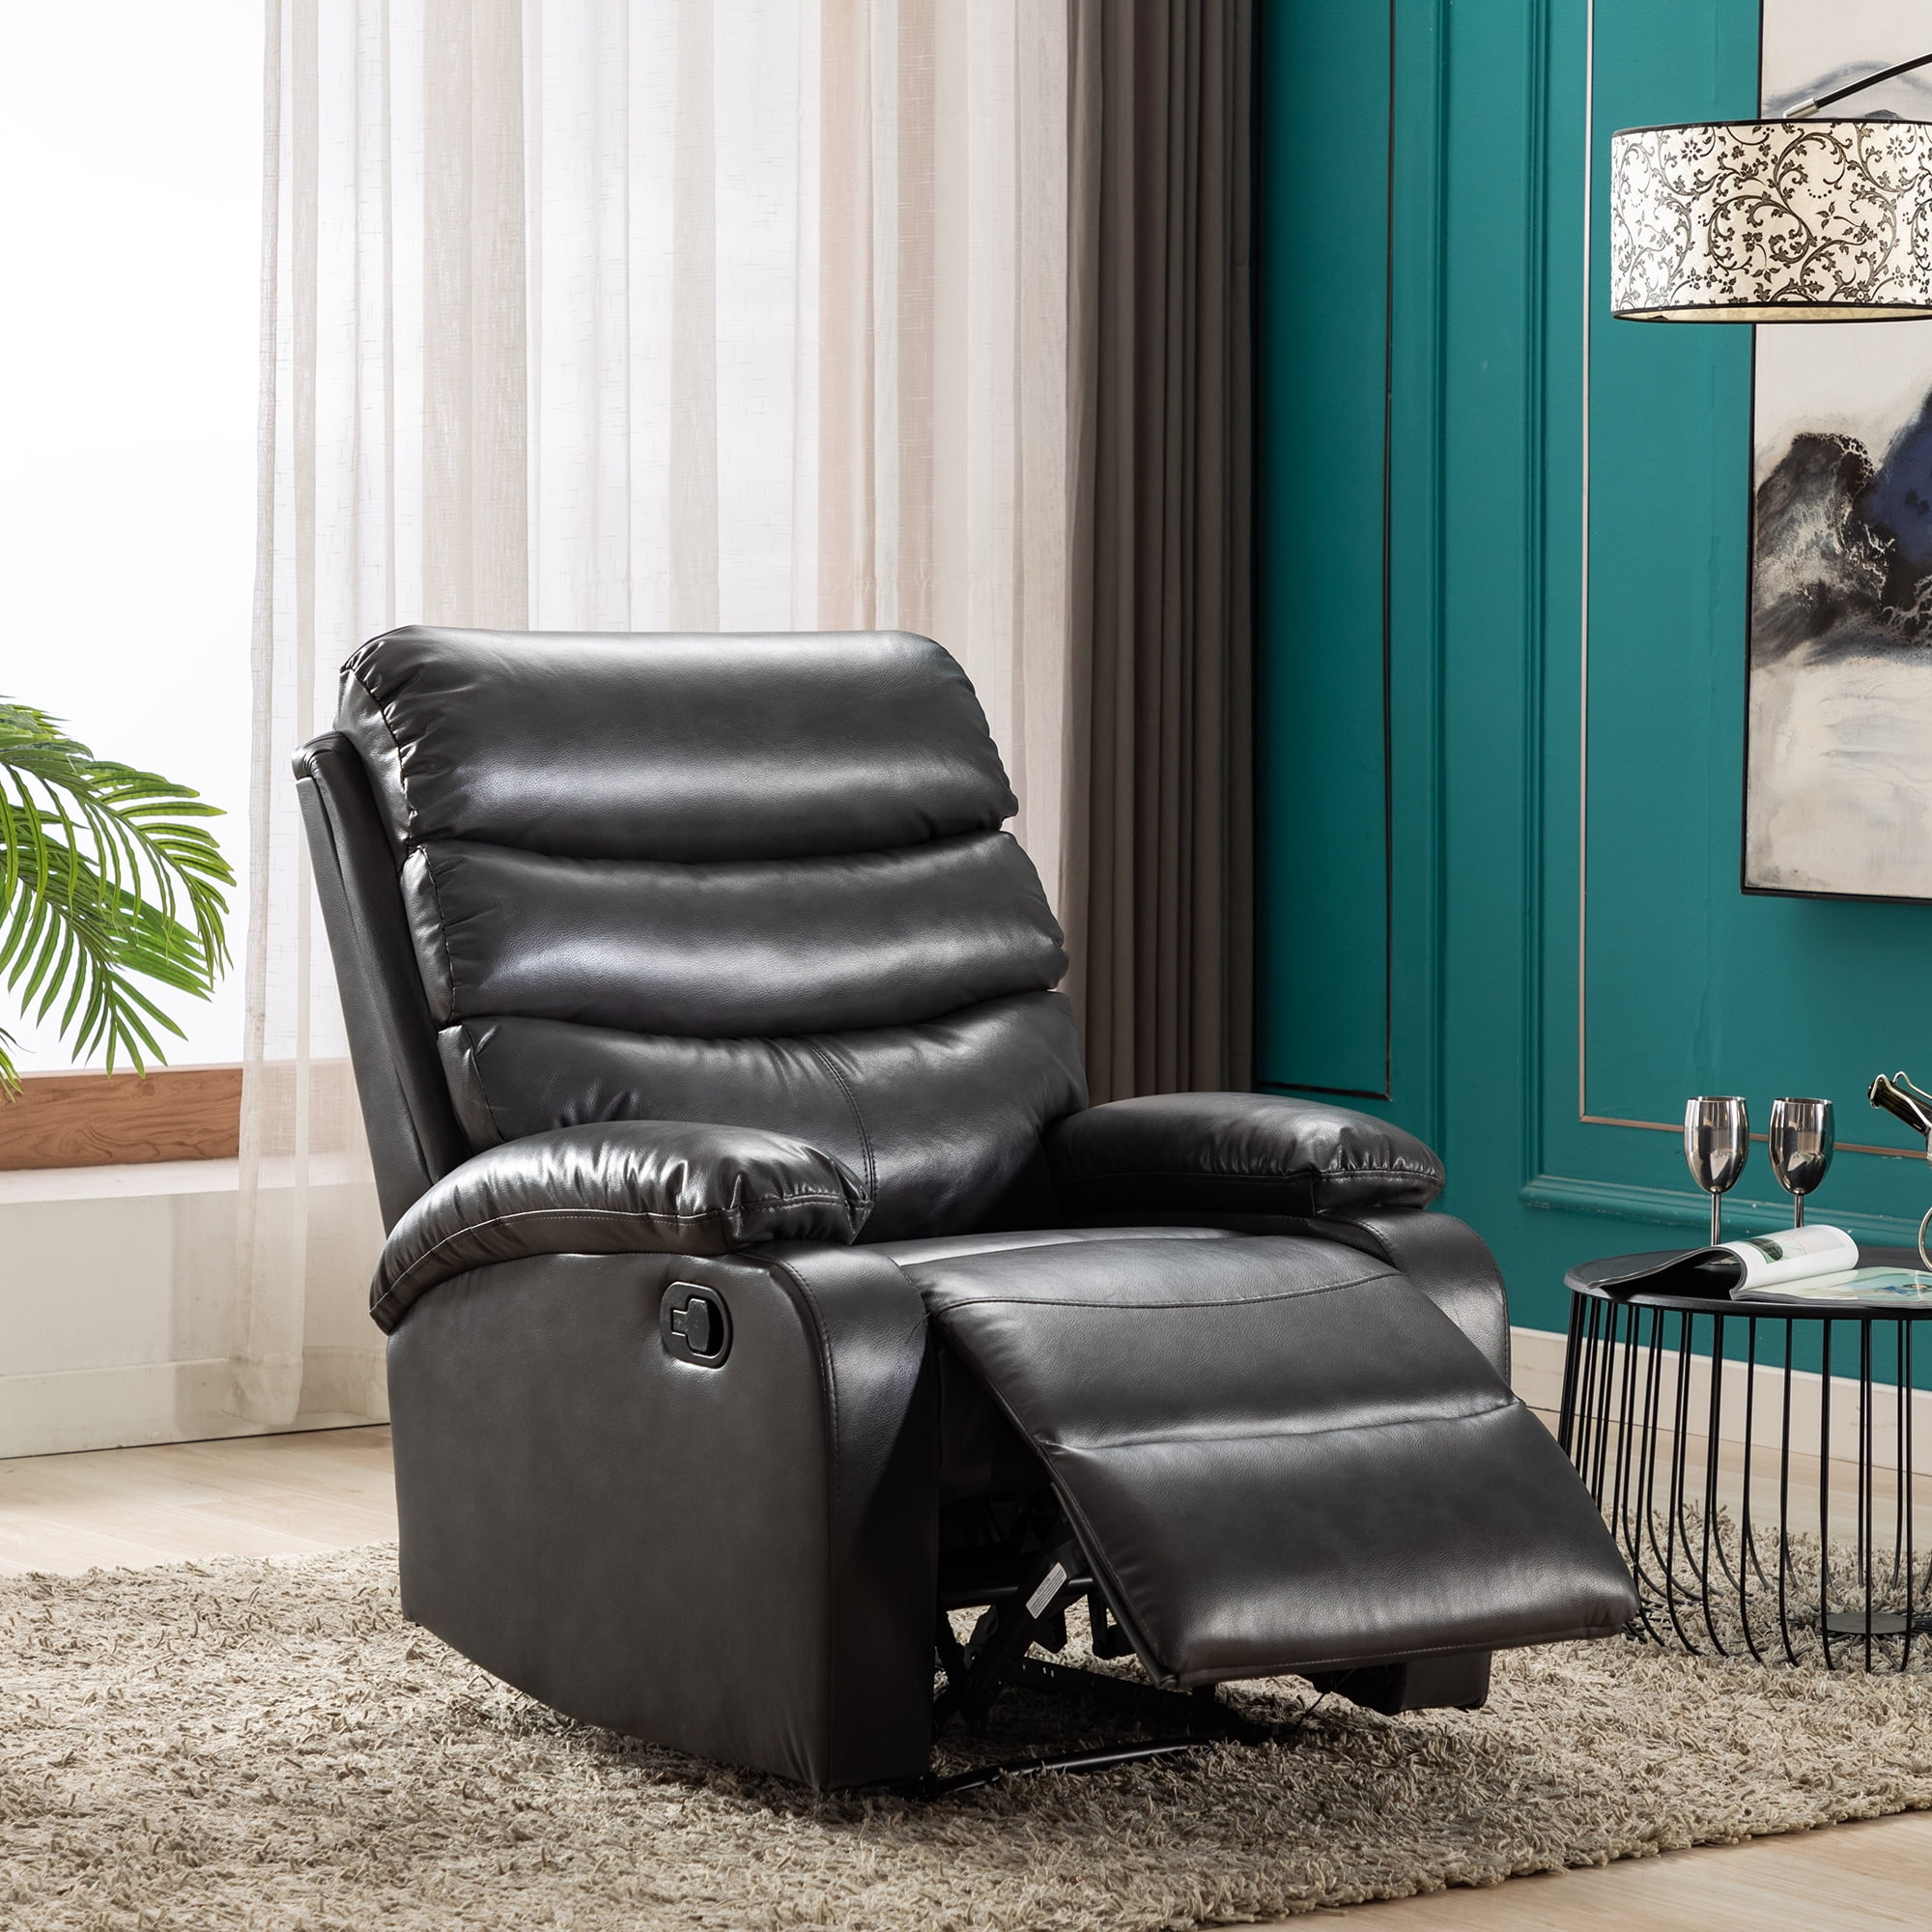 recliner chair,air leather recliner,rocking recliner for elderly,reclining chair for bedroom & living room,home theater seating,heavy duty